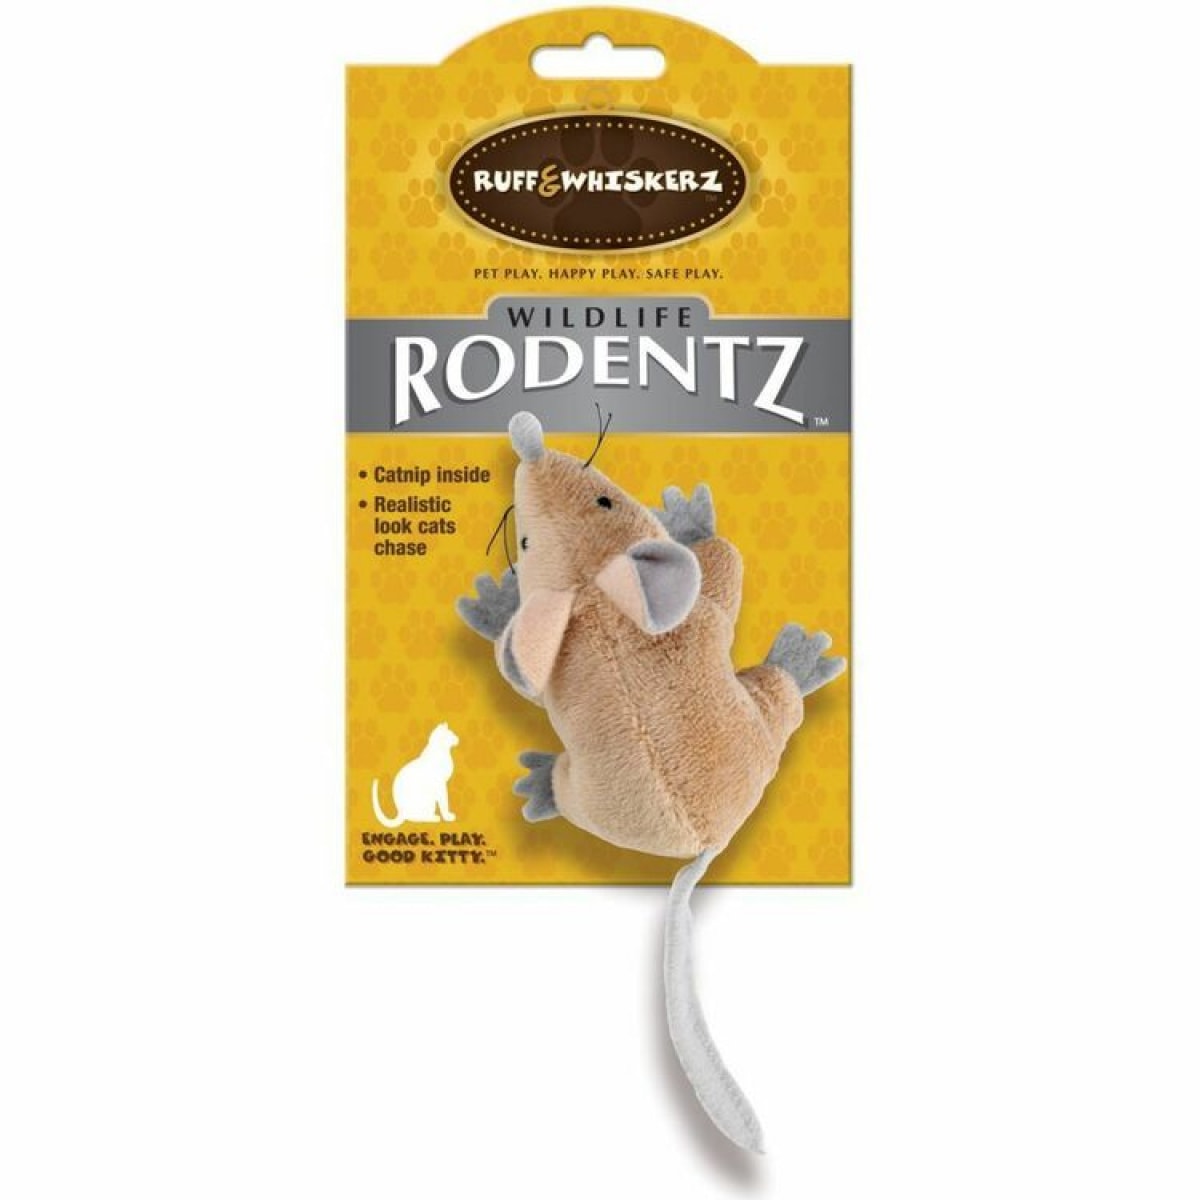 Widlife Rodentz – Mouse – Pawfect Supplies Ltd Product Image